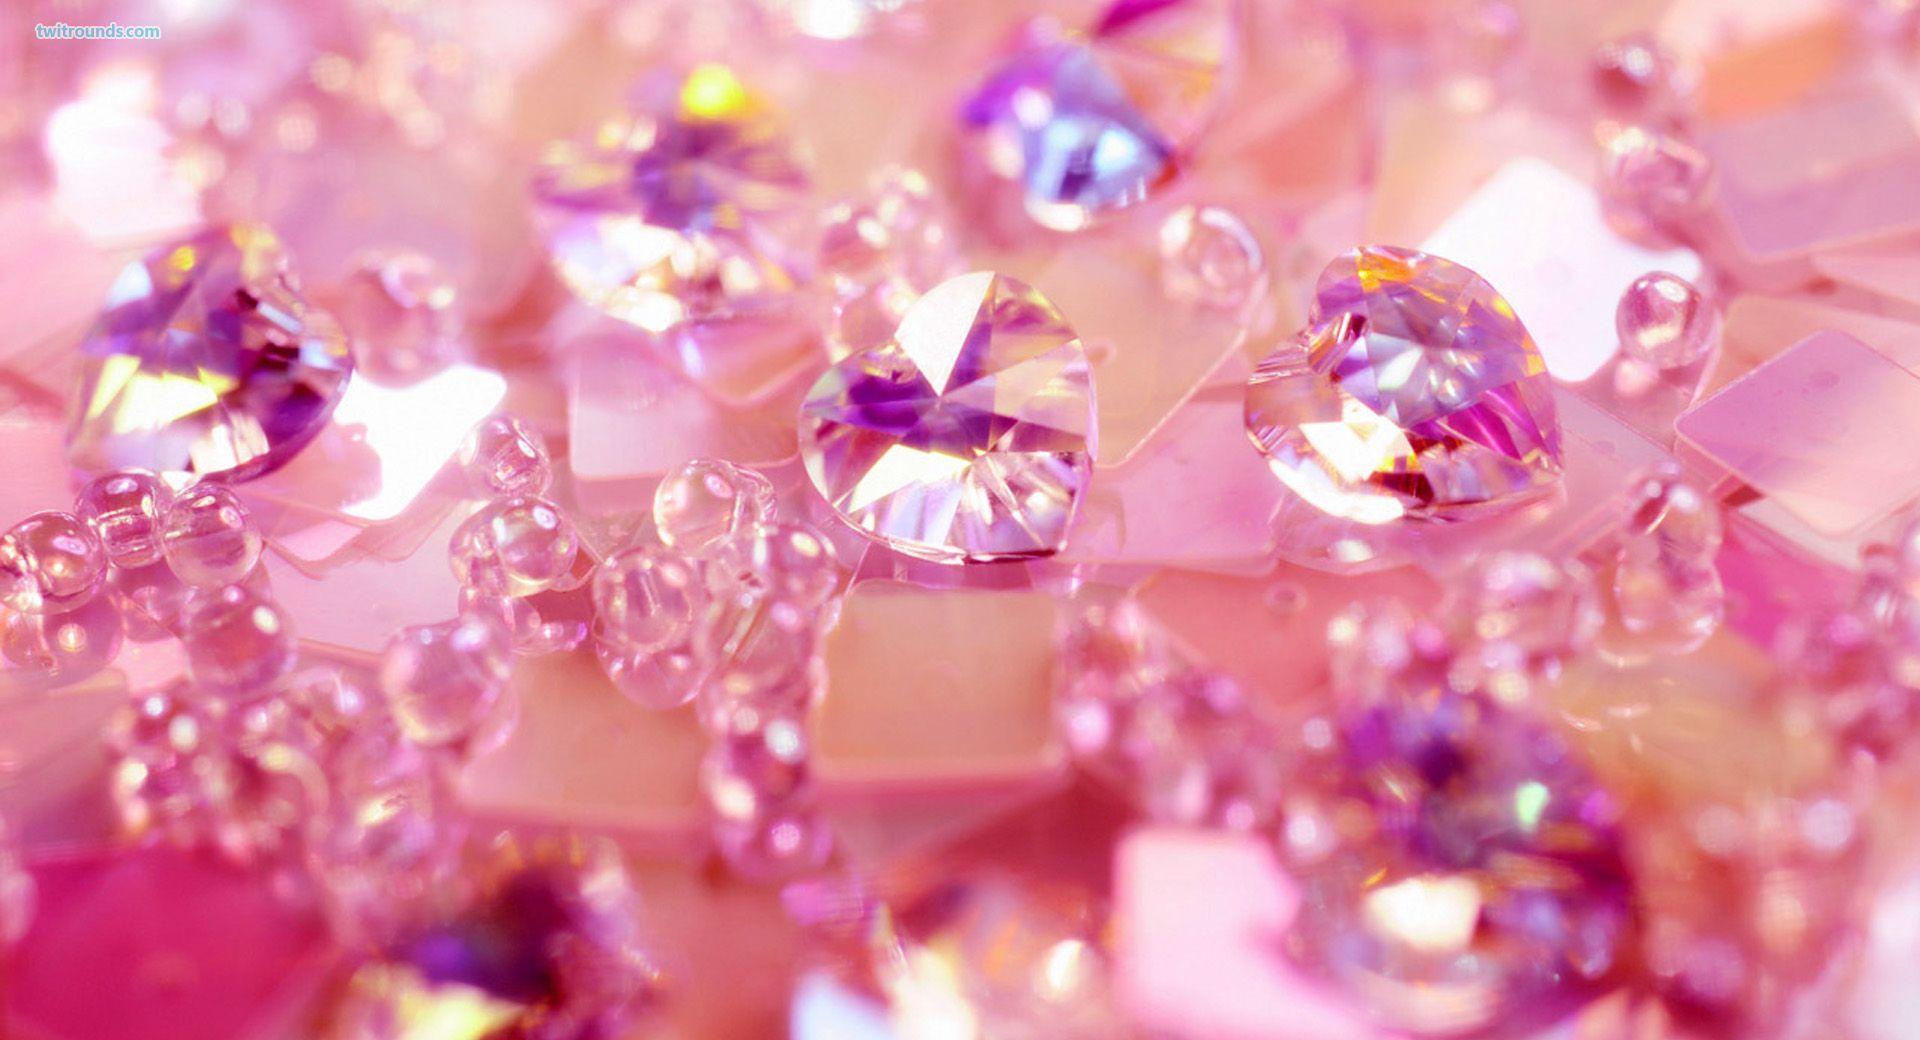 Crystal Hearts Twitter Background Twitter Background. aida